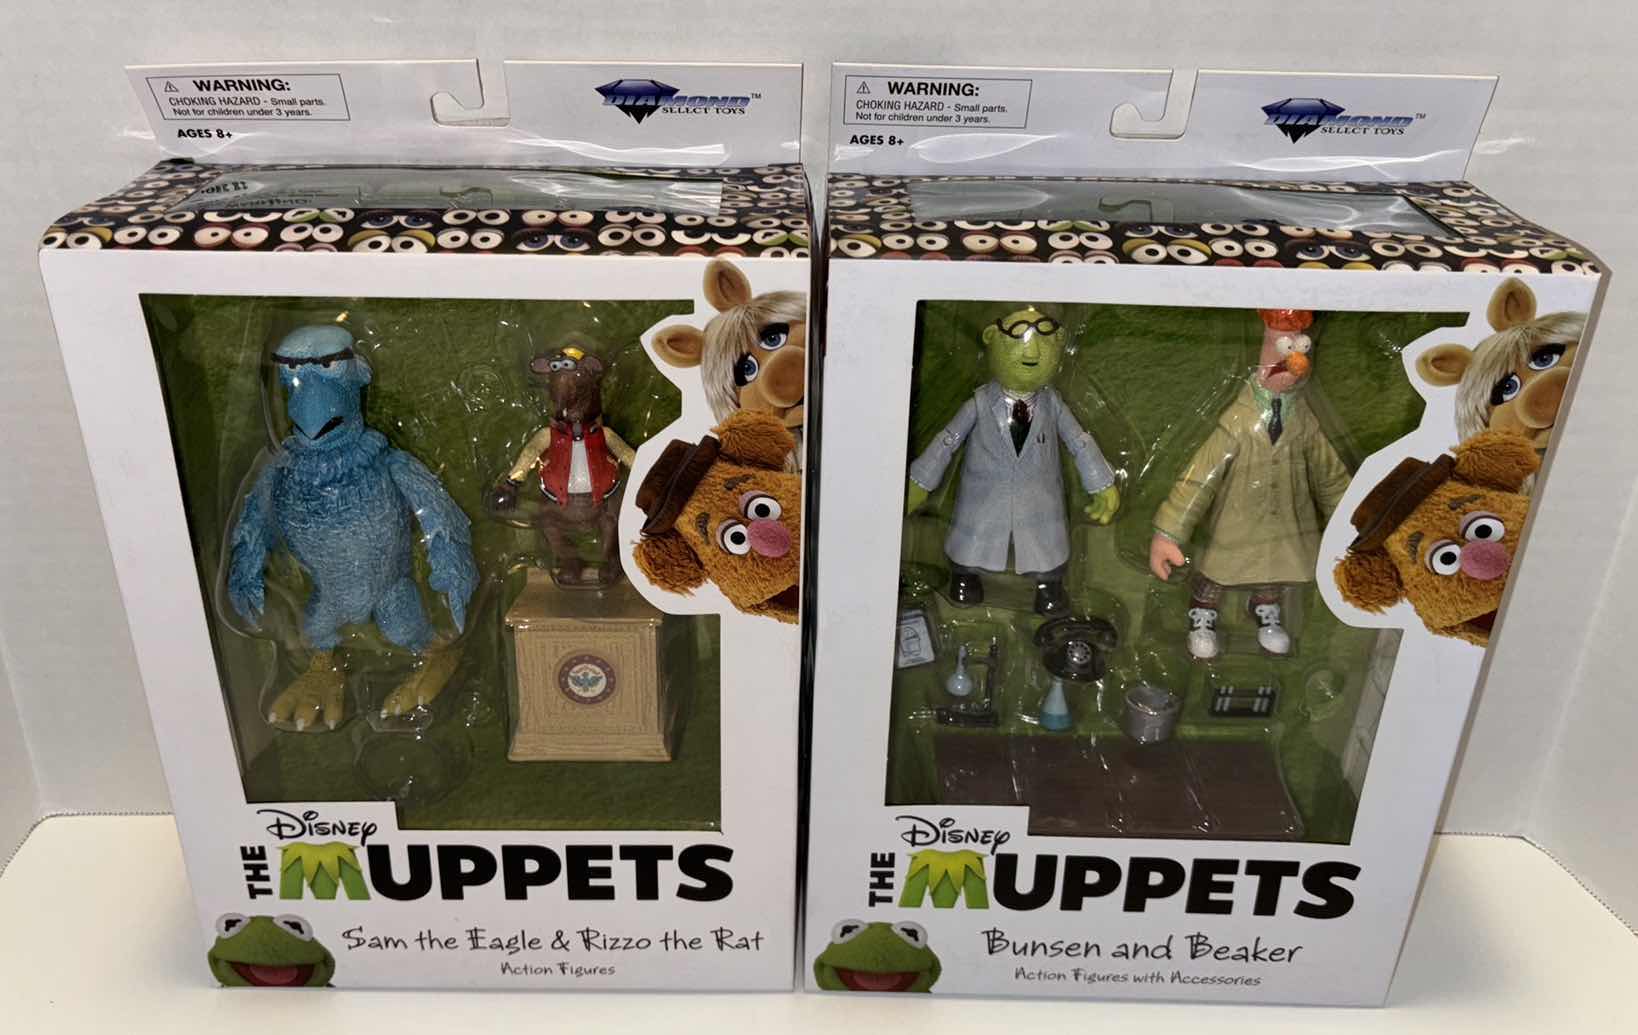 Photo 1 of NEW DIAMOND SELECT TOYS DISNEY THE MUPPETS ACTION FIGURES & ACCESSORIES 2-PACK, “SAM THE EAGLE & RIZZO THE RAT” & “BUNSEN AND BEAKER” (2)